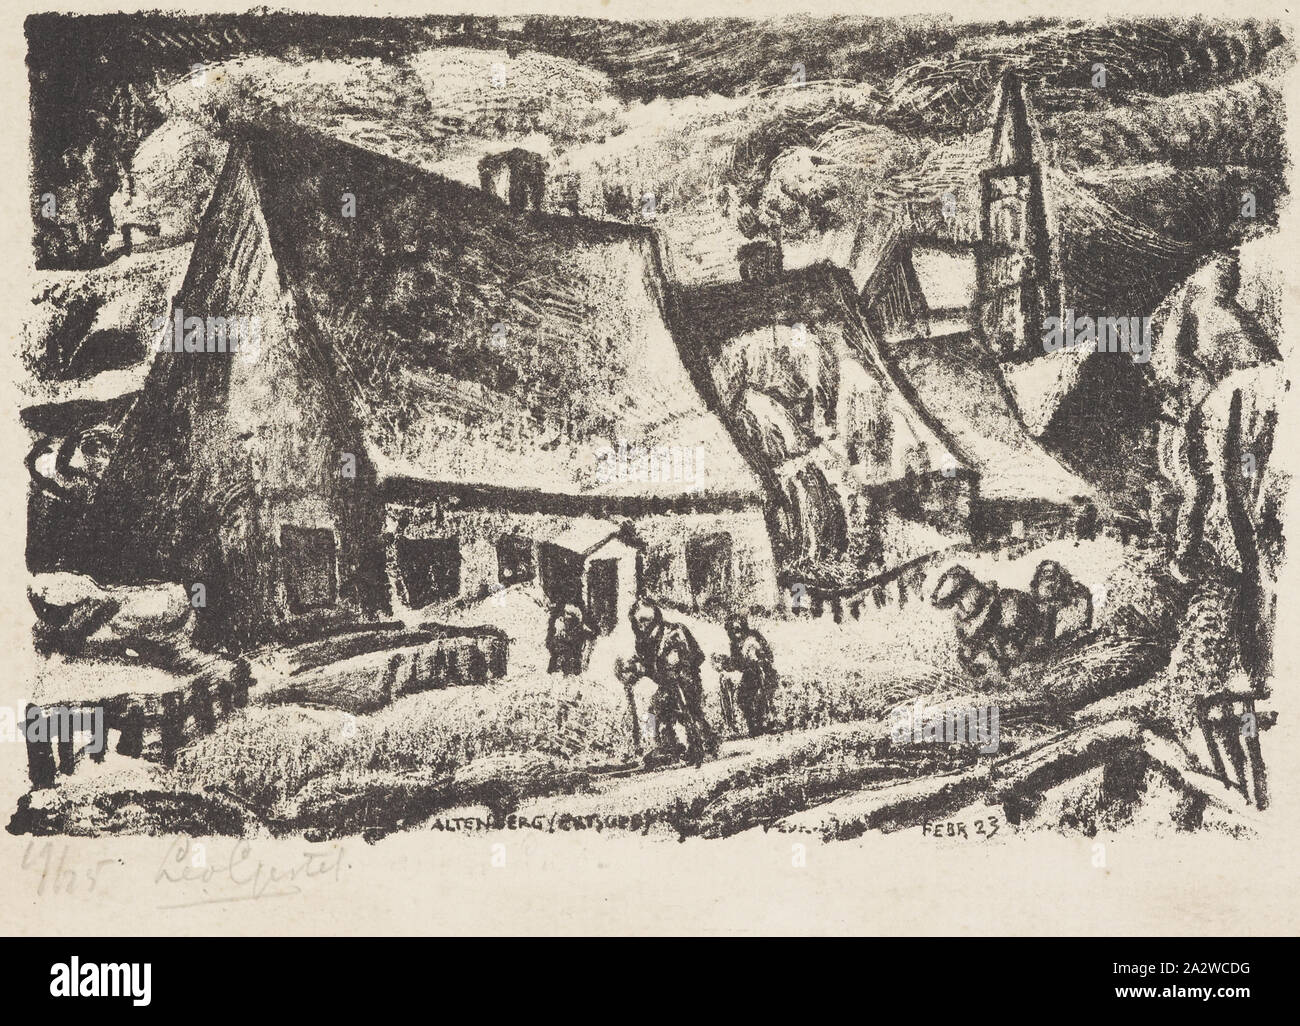 Altenberg (Ertsgebergte), Leo Gestel (Dutch, 1881-1941), 1923, lithograph, 3-1/2 x 5-3/4 in. (image) 6-3/4 x 8-7/8 (sheet), Inscribed and signed in pencil, below image, l.l.: 19/25 Leo Gestel Stock Photo